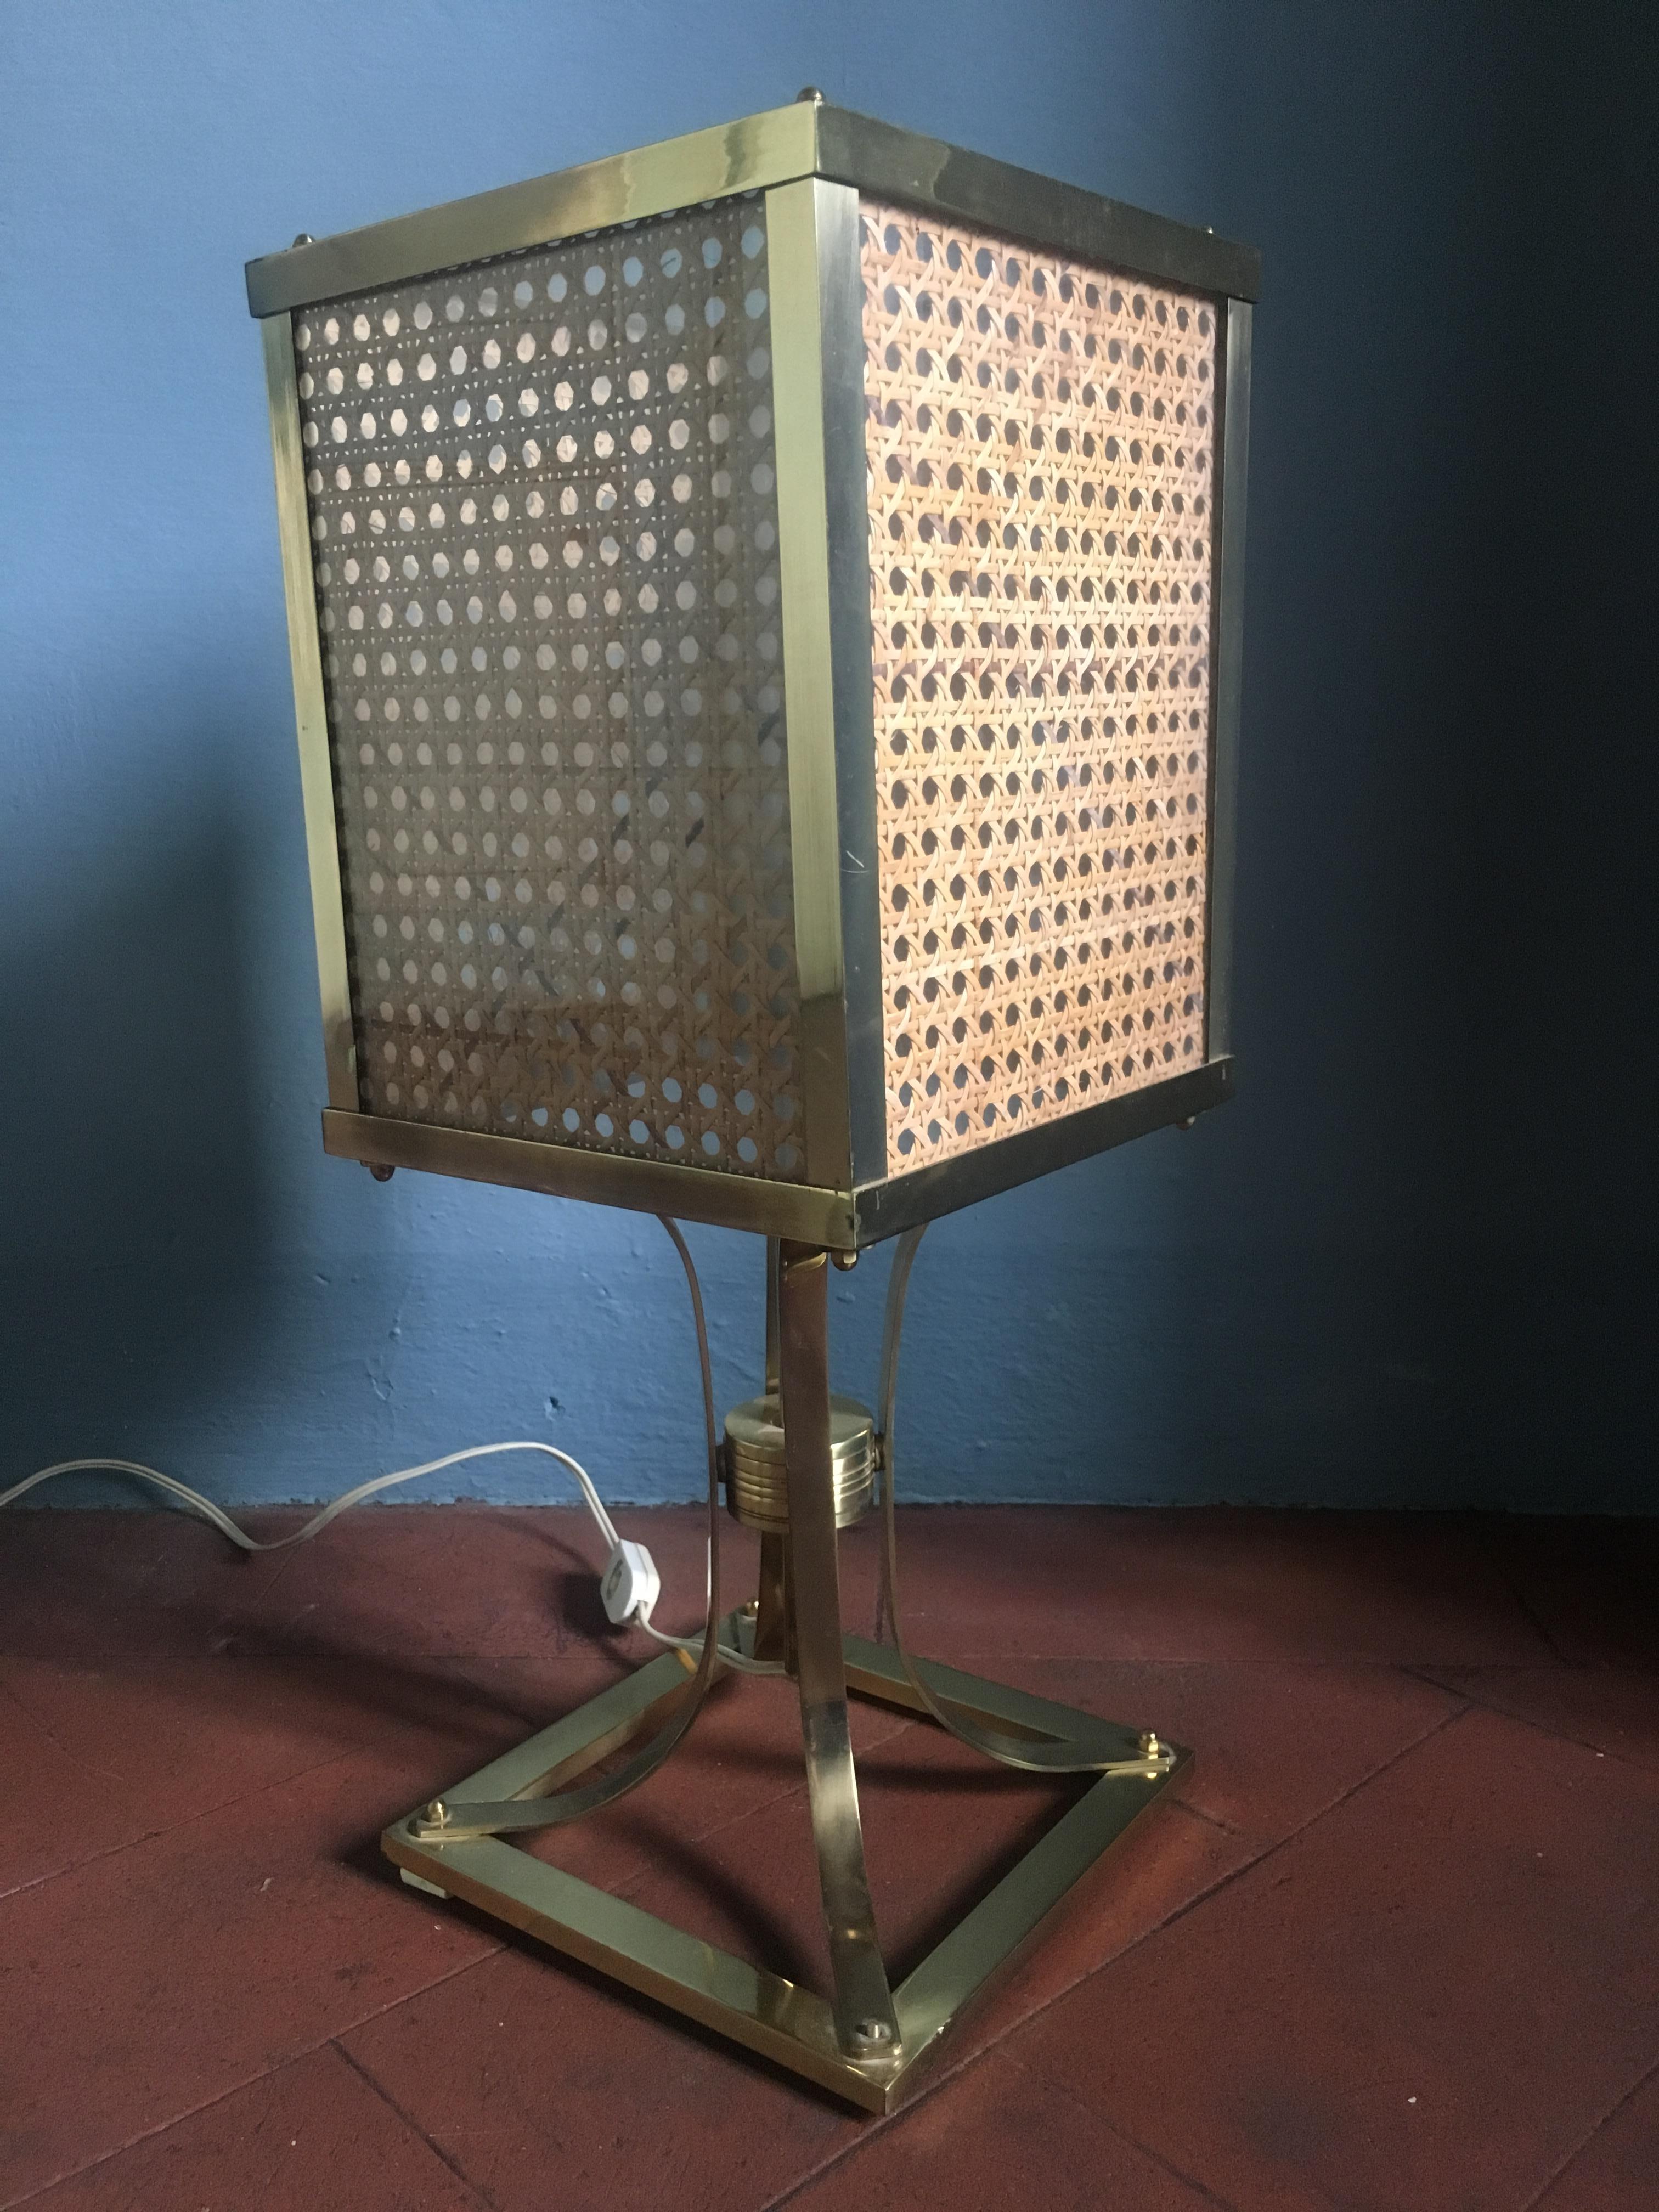 Mid-Century Modern Italian brass table lamp. The lampshade of this table lamp has made in Vienna straw put inside two sheets of plexiglass, brass framed. The lamp is in good vintage conditions, wear consistent with age and use.